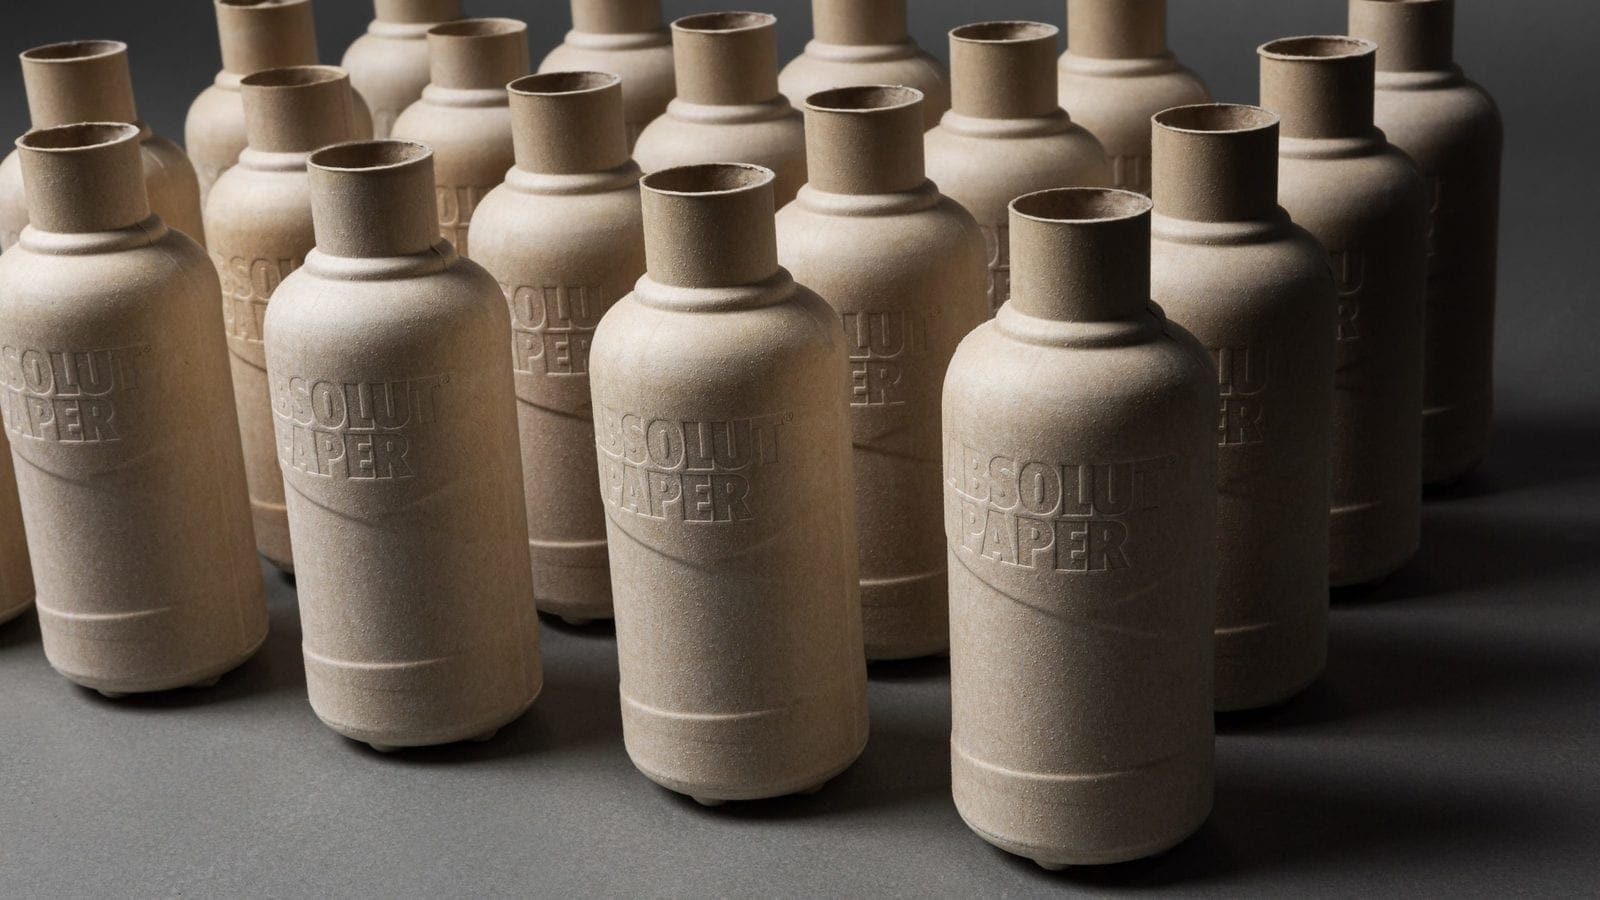 Absolut Vodka launches its paper bottle prototype trial in Sweden and UK